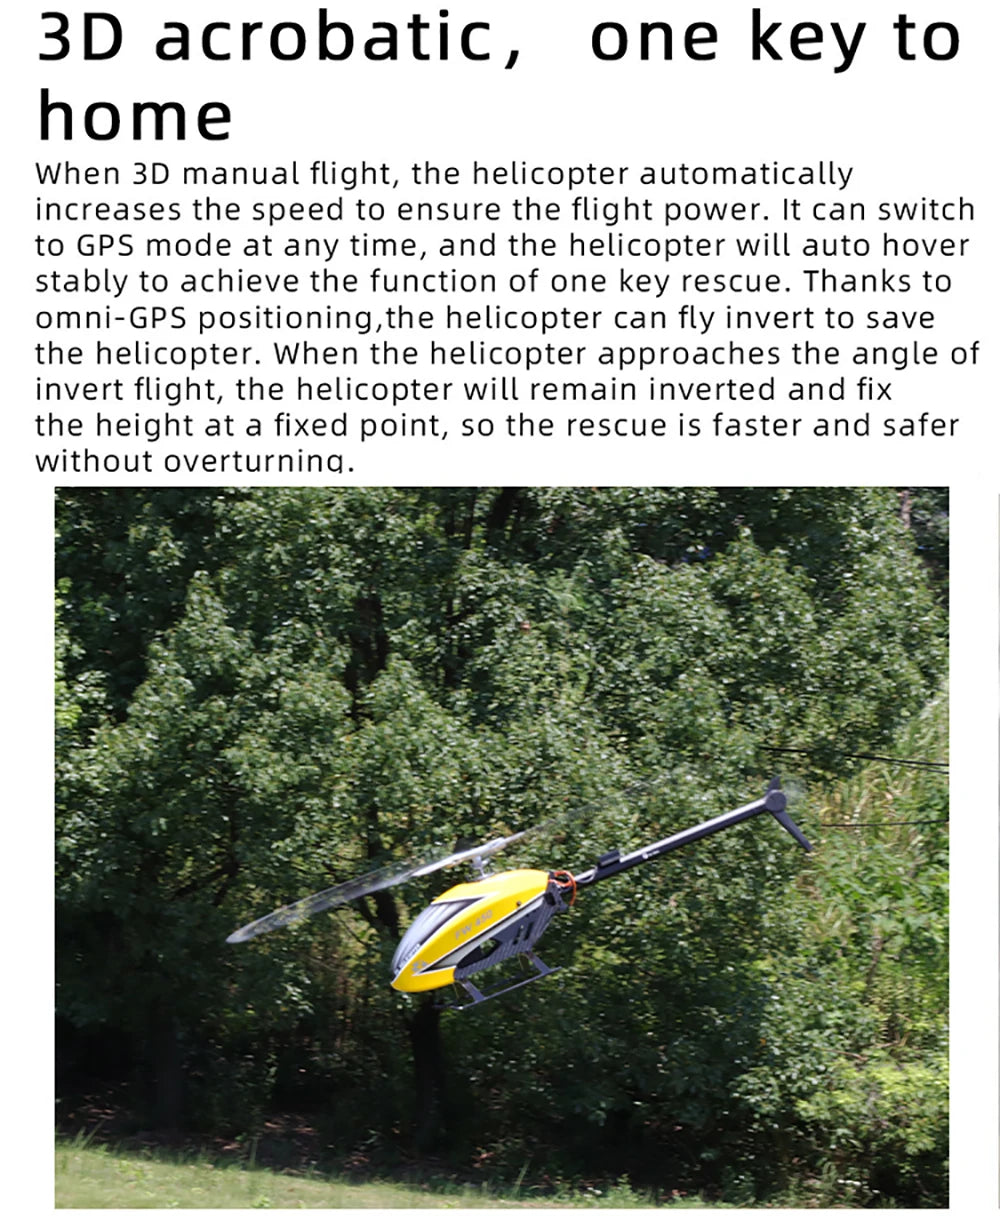 Fly Wing FW450L V2.5 RC Helicopters, the helicopter can fly invert to save the helicopter . thanks to omni-GPS